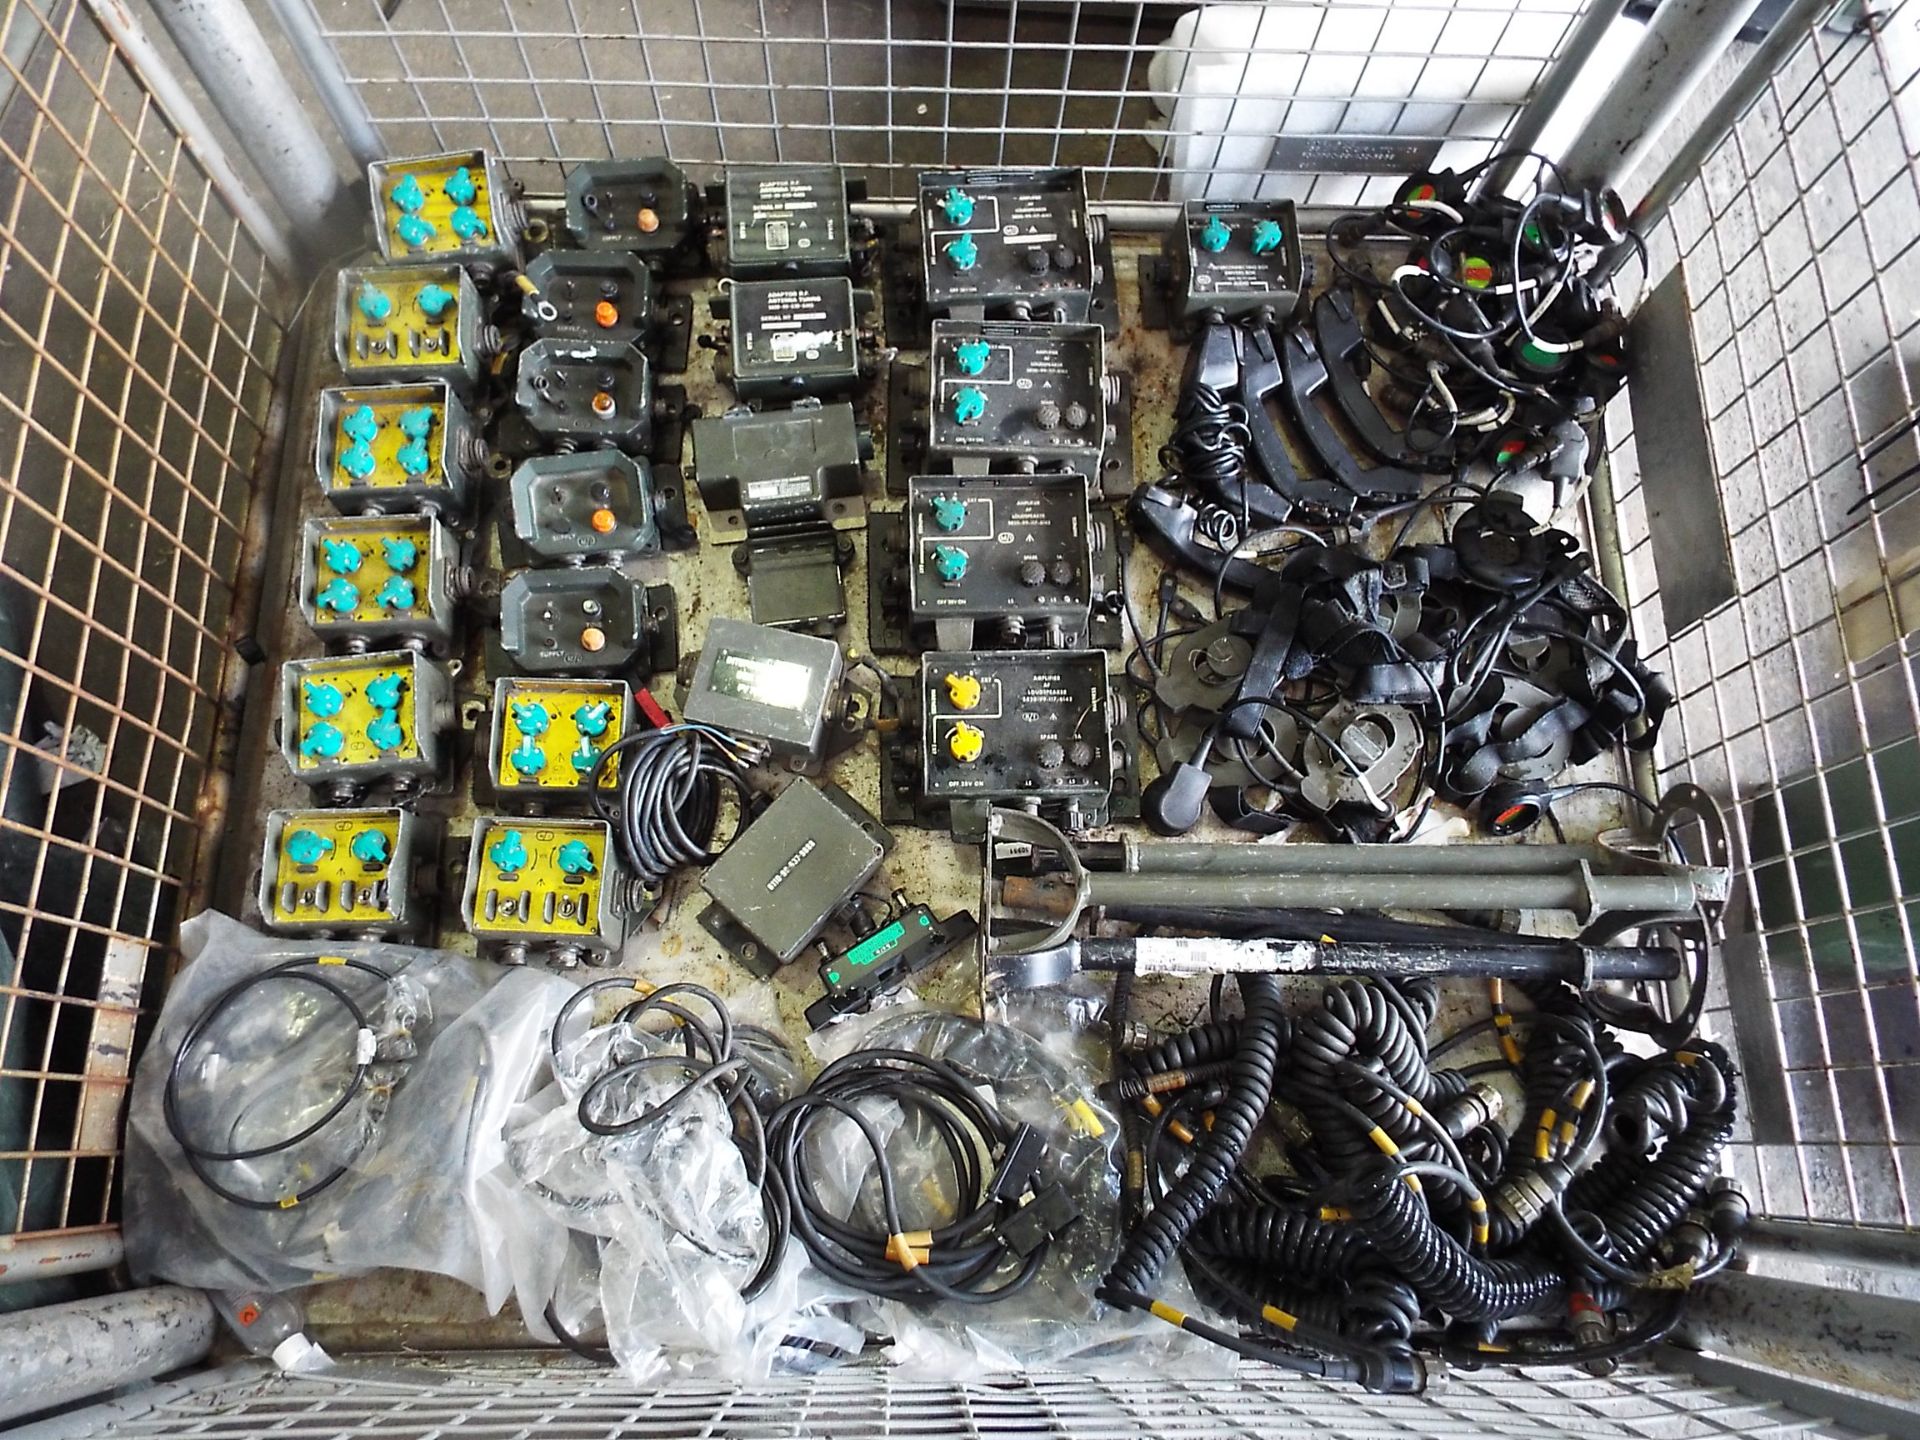 Mixed Stillage of Clansman Inc. Interconnecting Boxes, Headsets, Cables, Antenna Mounts etc etc